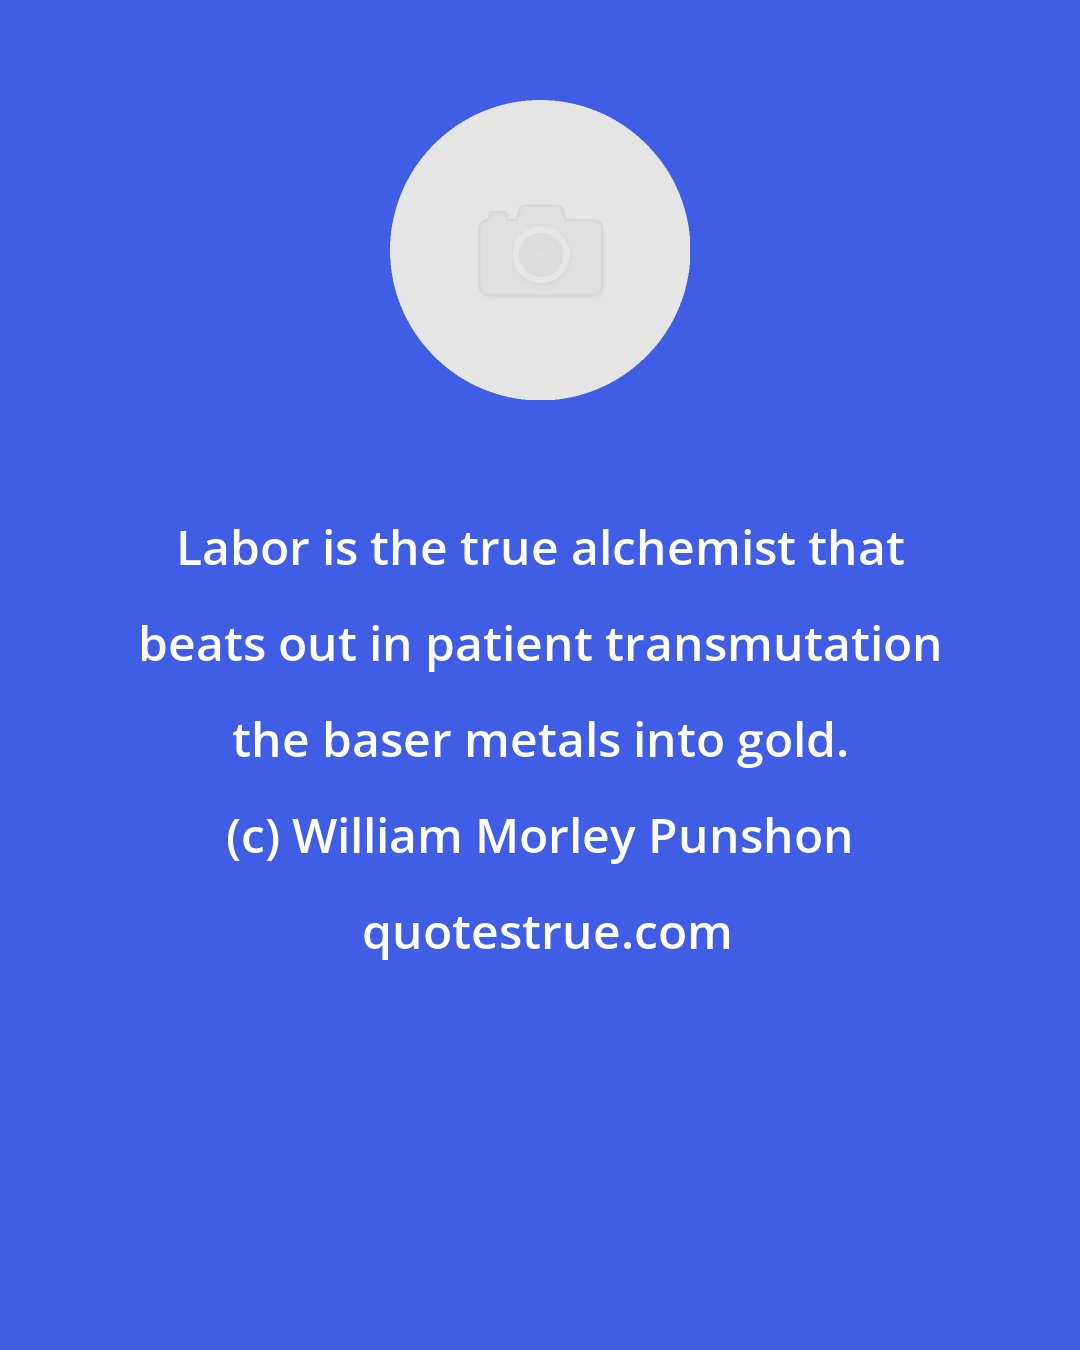 William Morley Punshon: Labor is the true alchemist that beats out in patient transmutation the baser metals into gold.